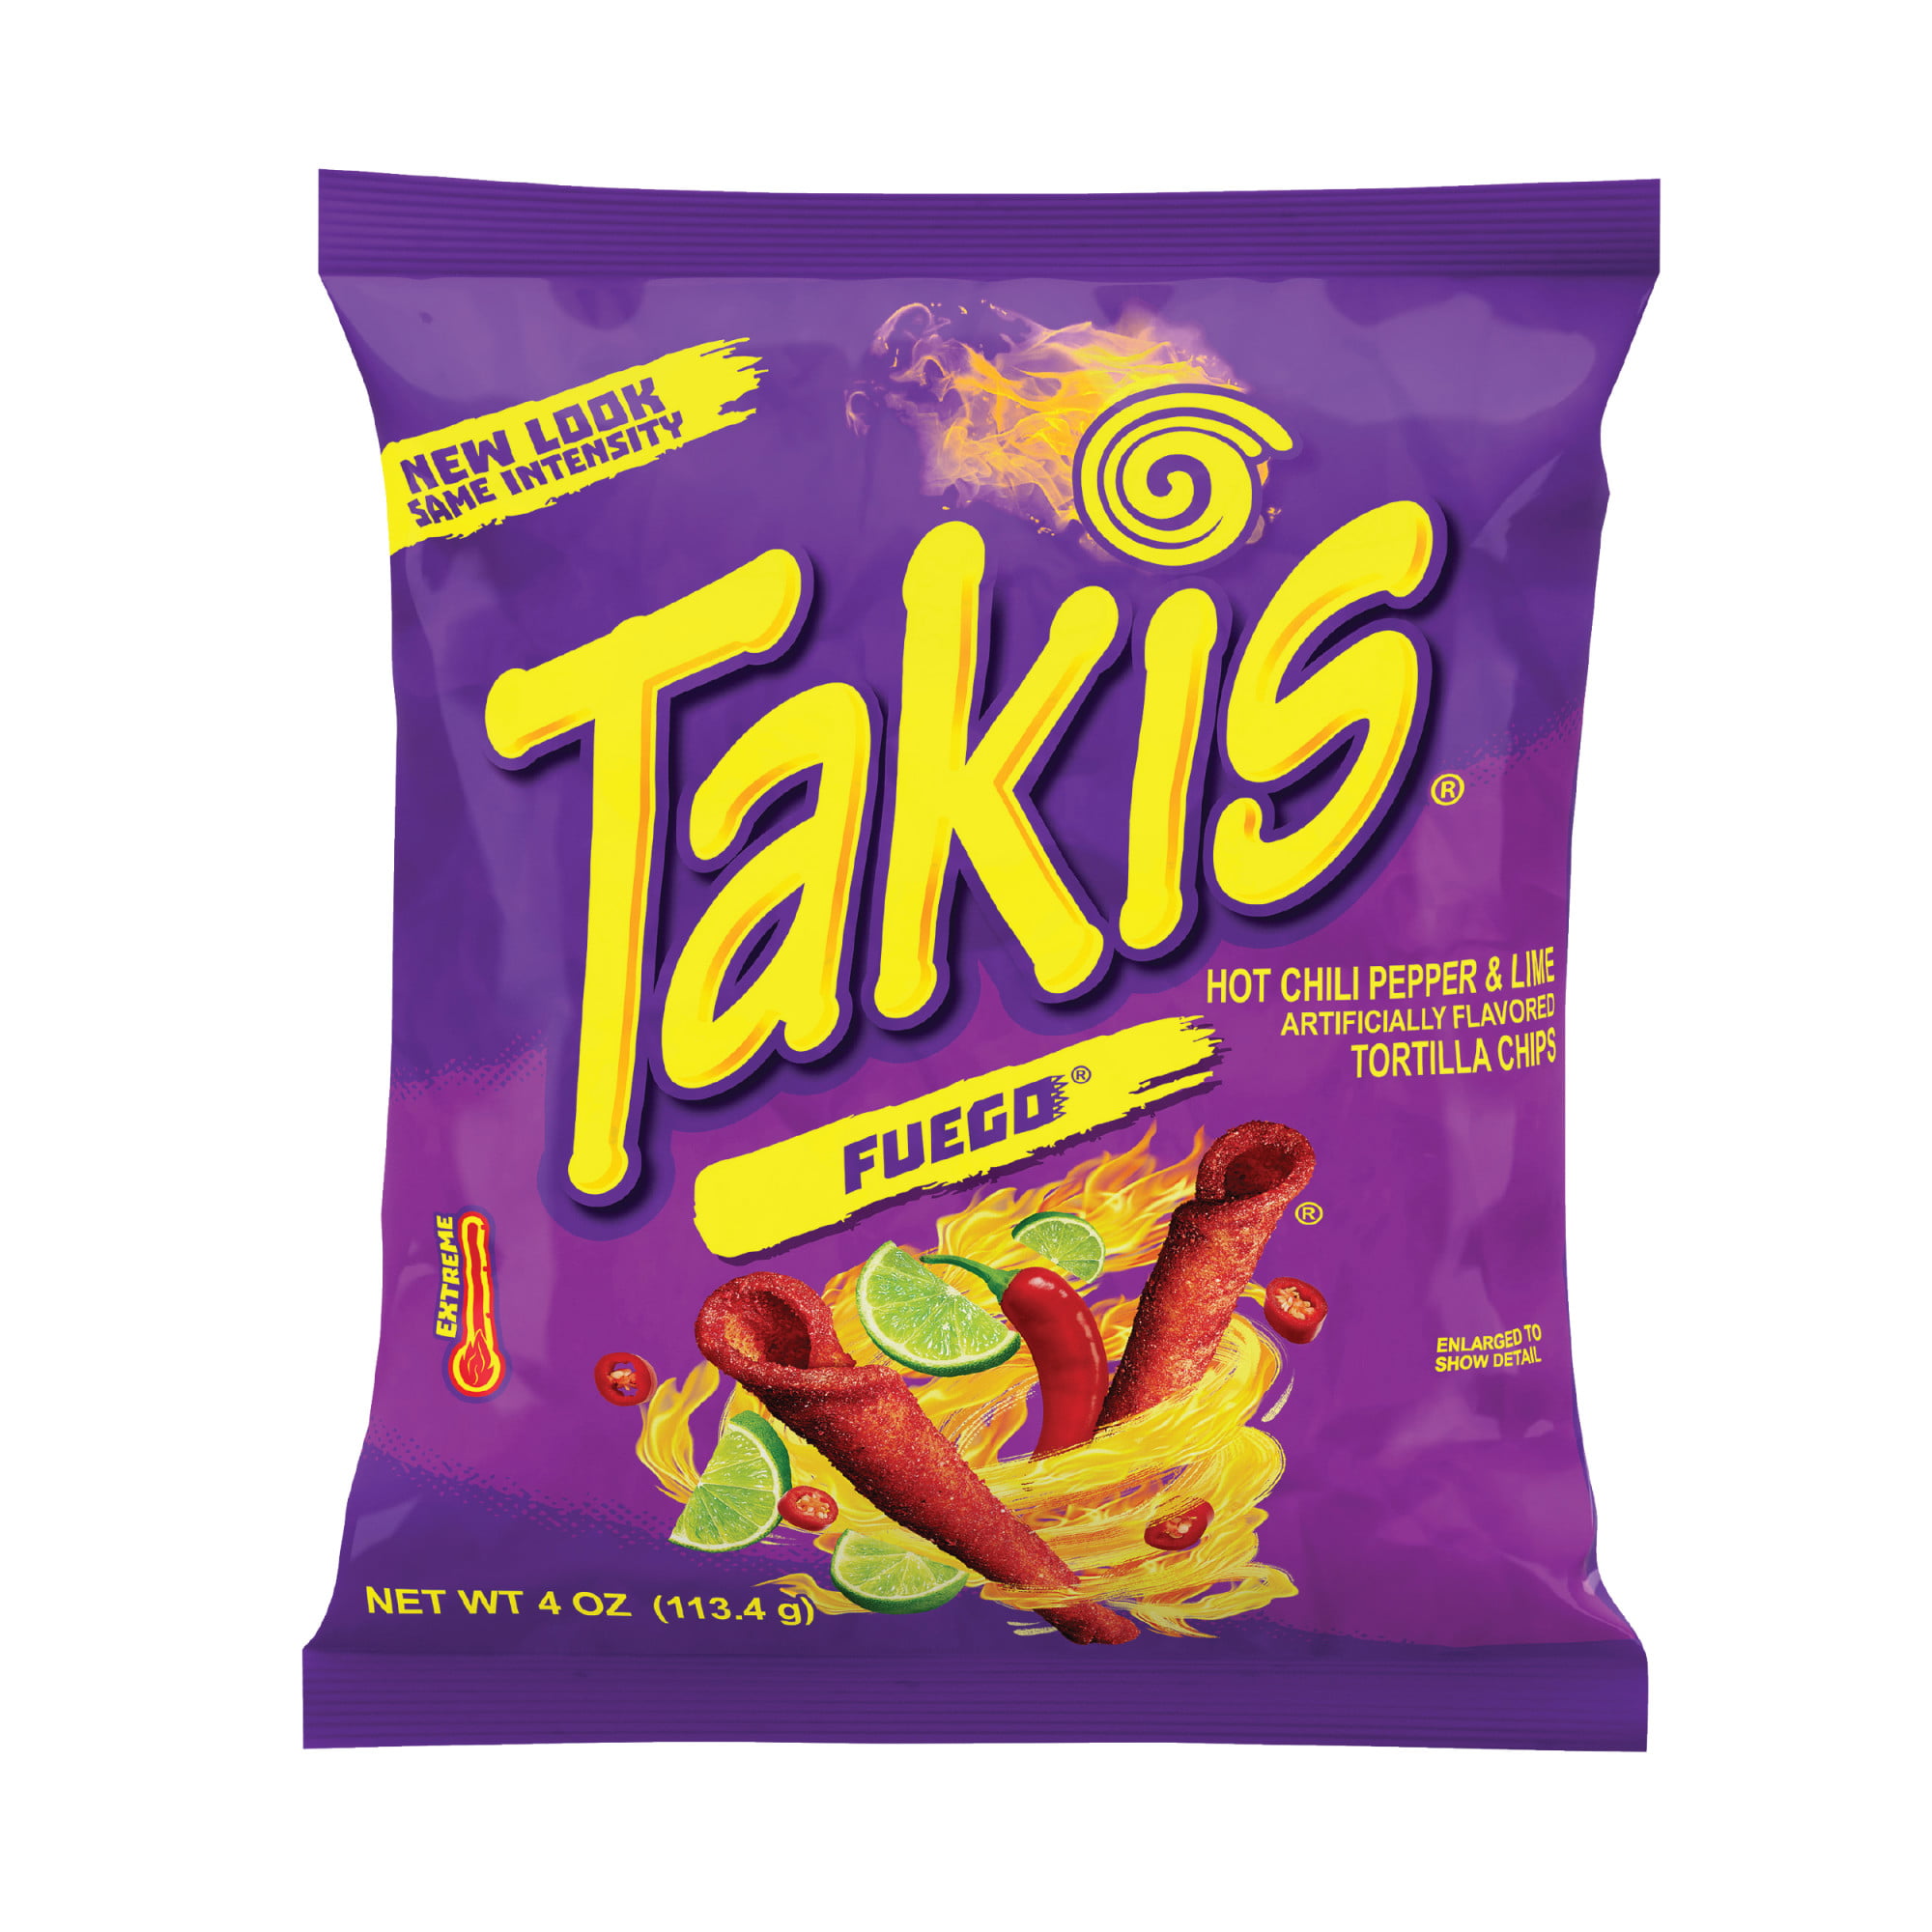 Takis Fuego Rolls 4 oz Bag,  Hot Chili Pepper & Lime Flavored Spicy Tortilla Chips